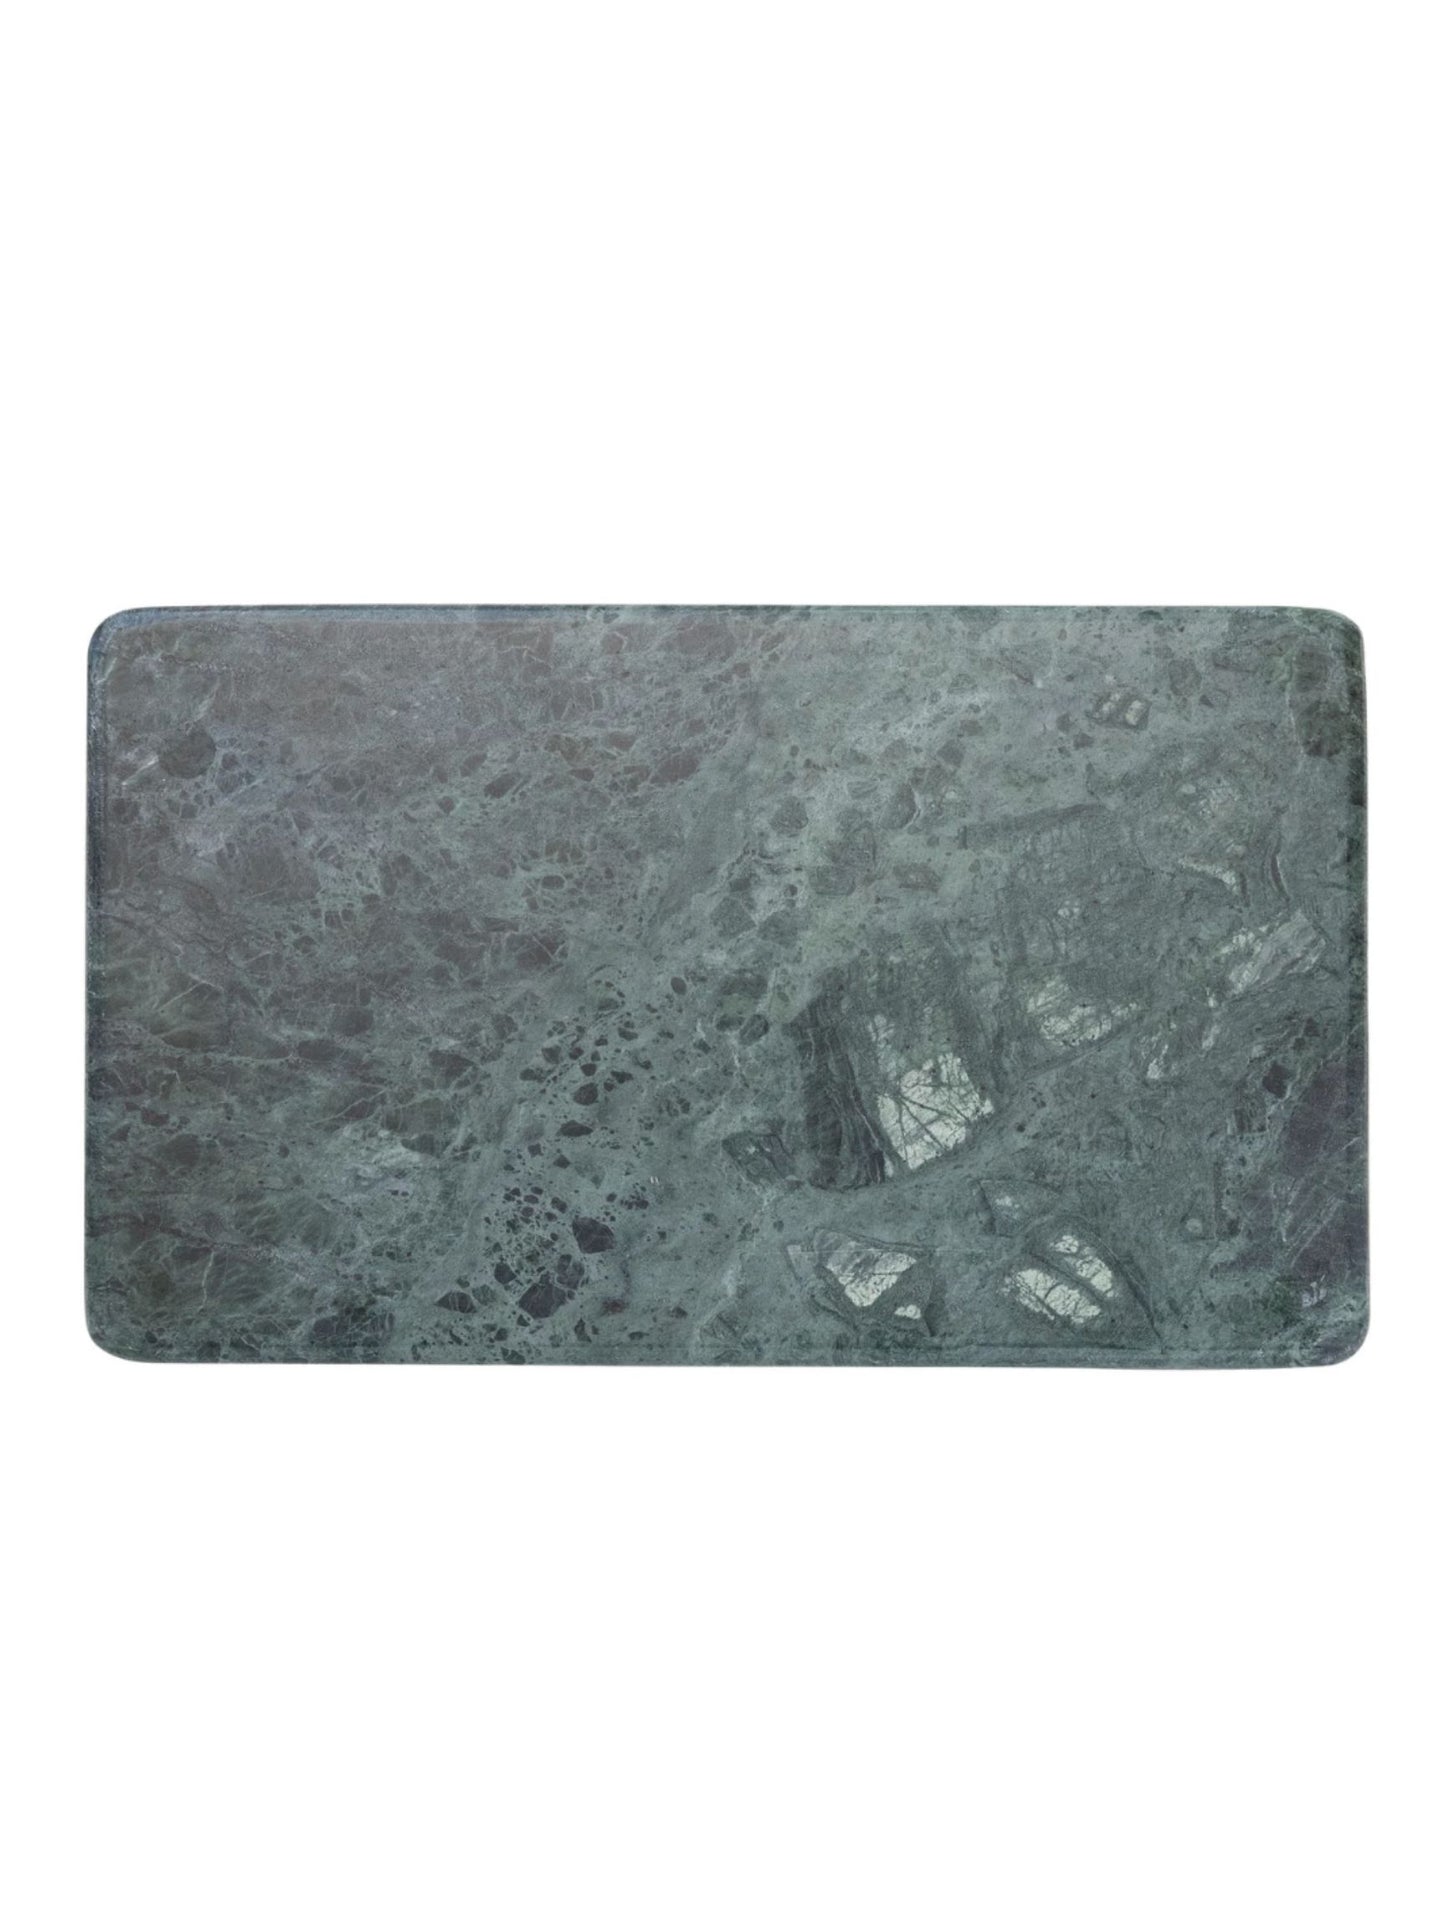 Green Marble Cheese/Cutting Board (PICK UP ONLY)